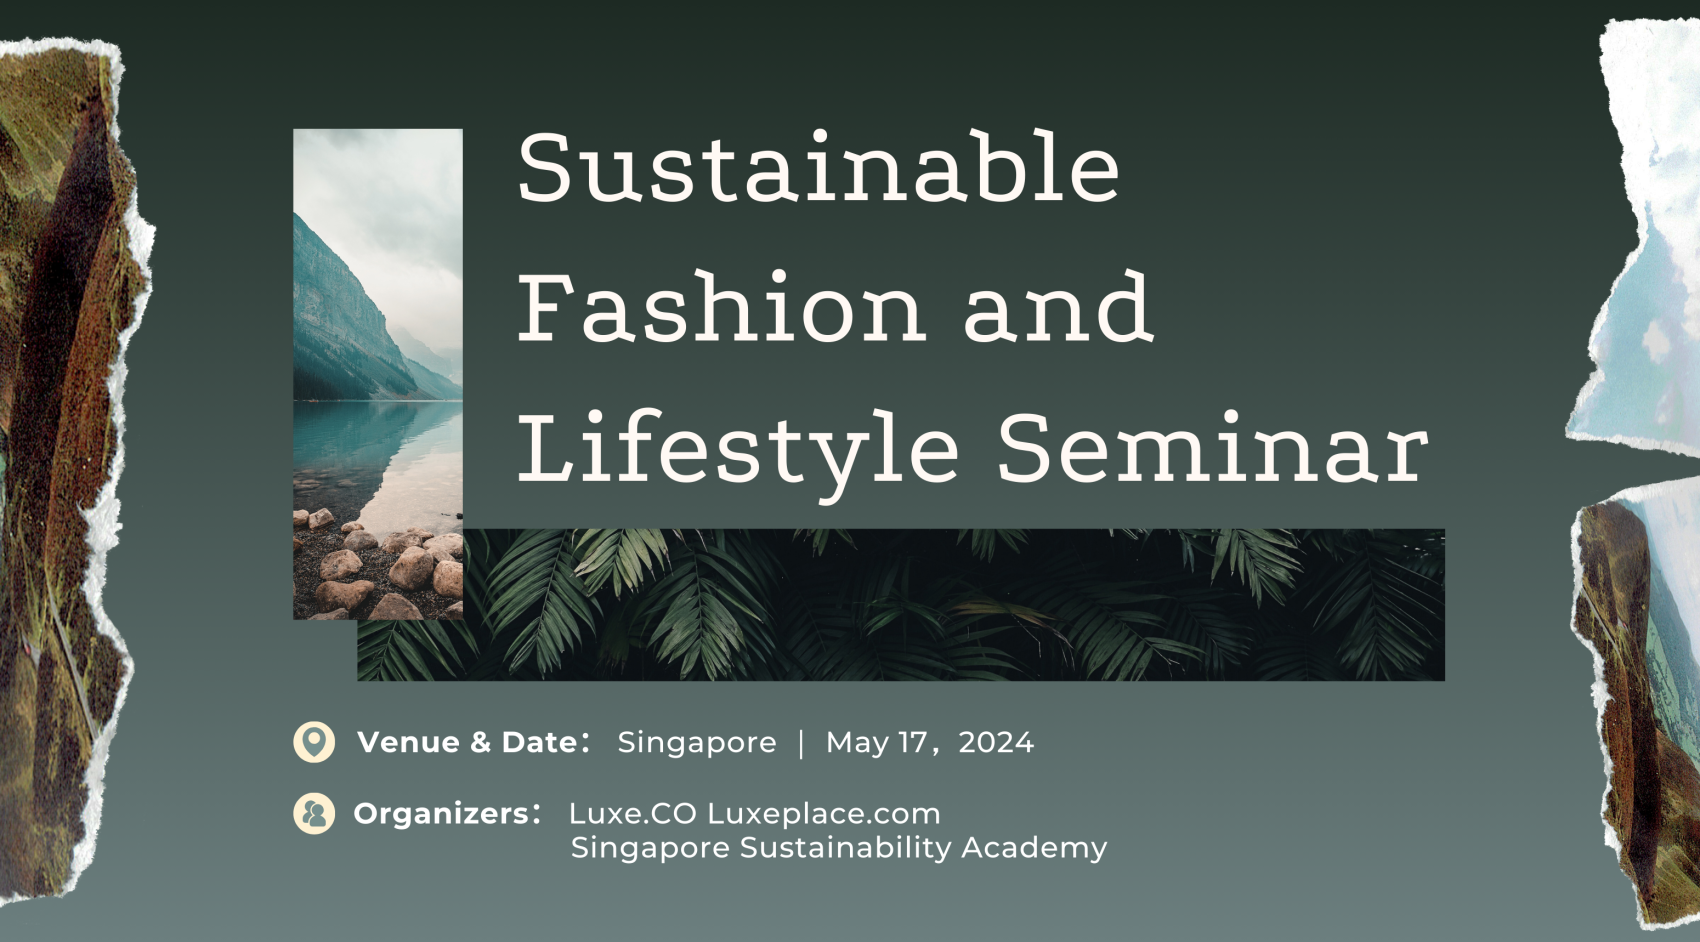 Sustainable Fashion & Lifestyle Seminar in Singapore, May 17